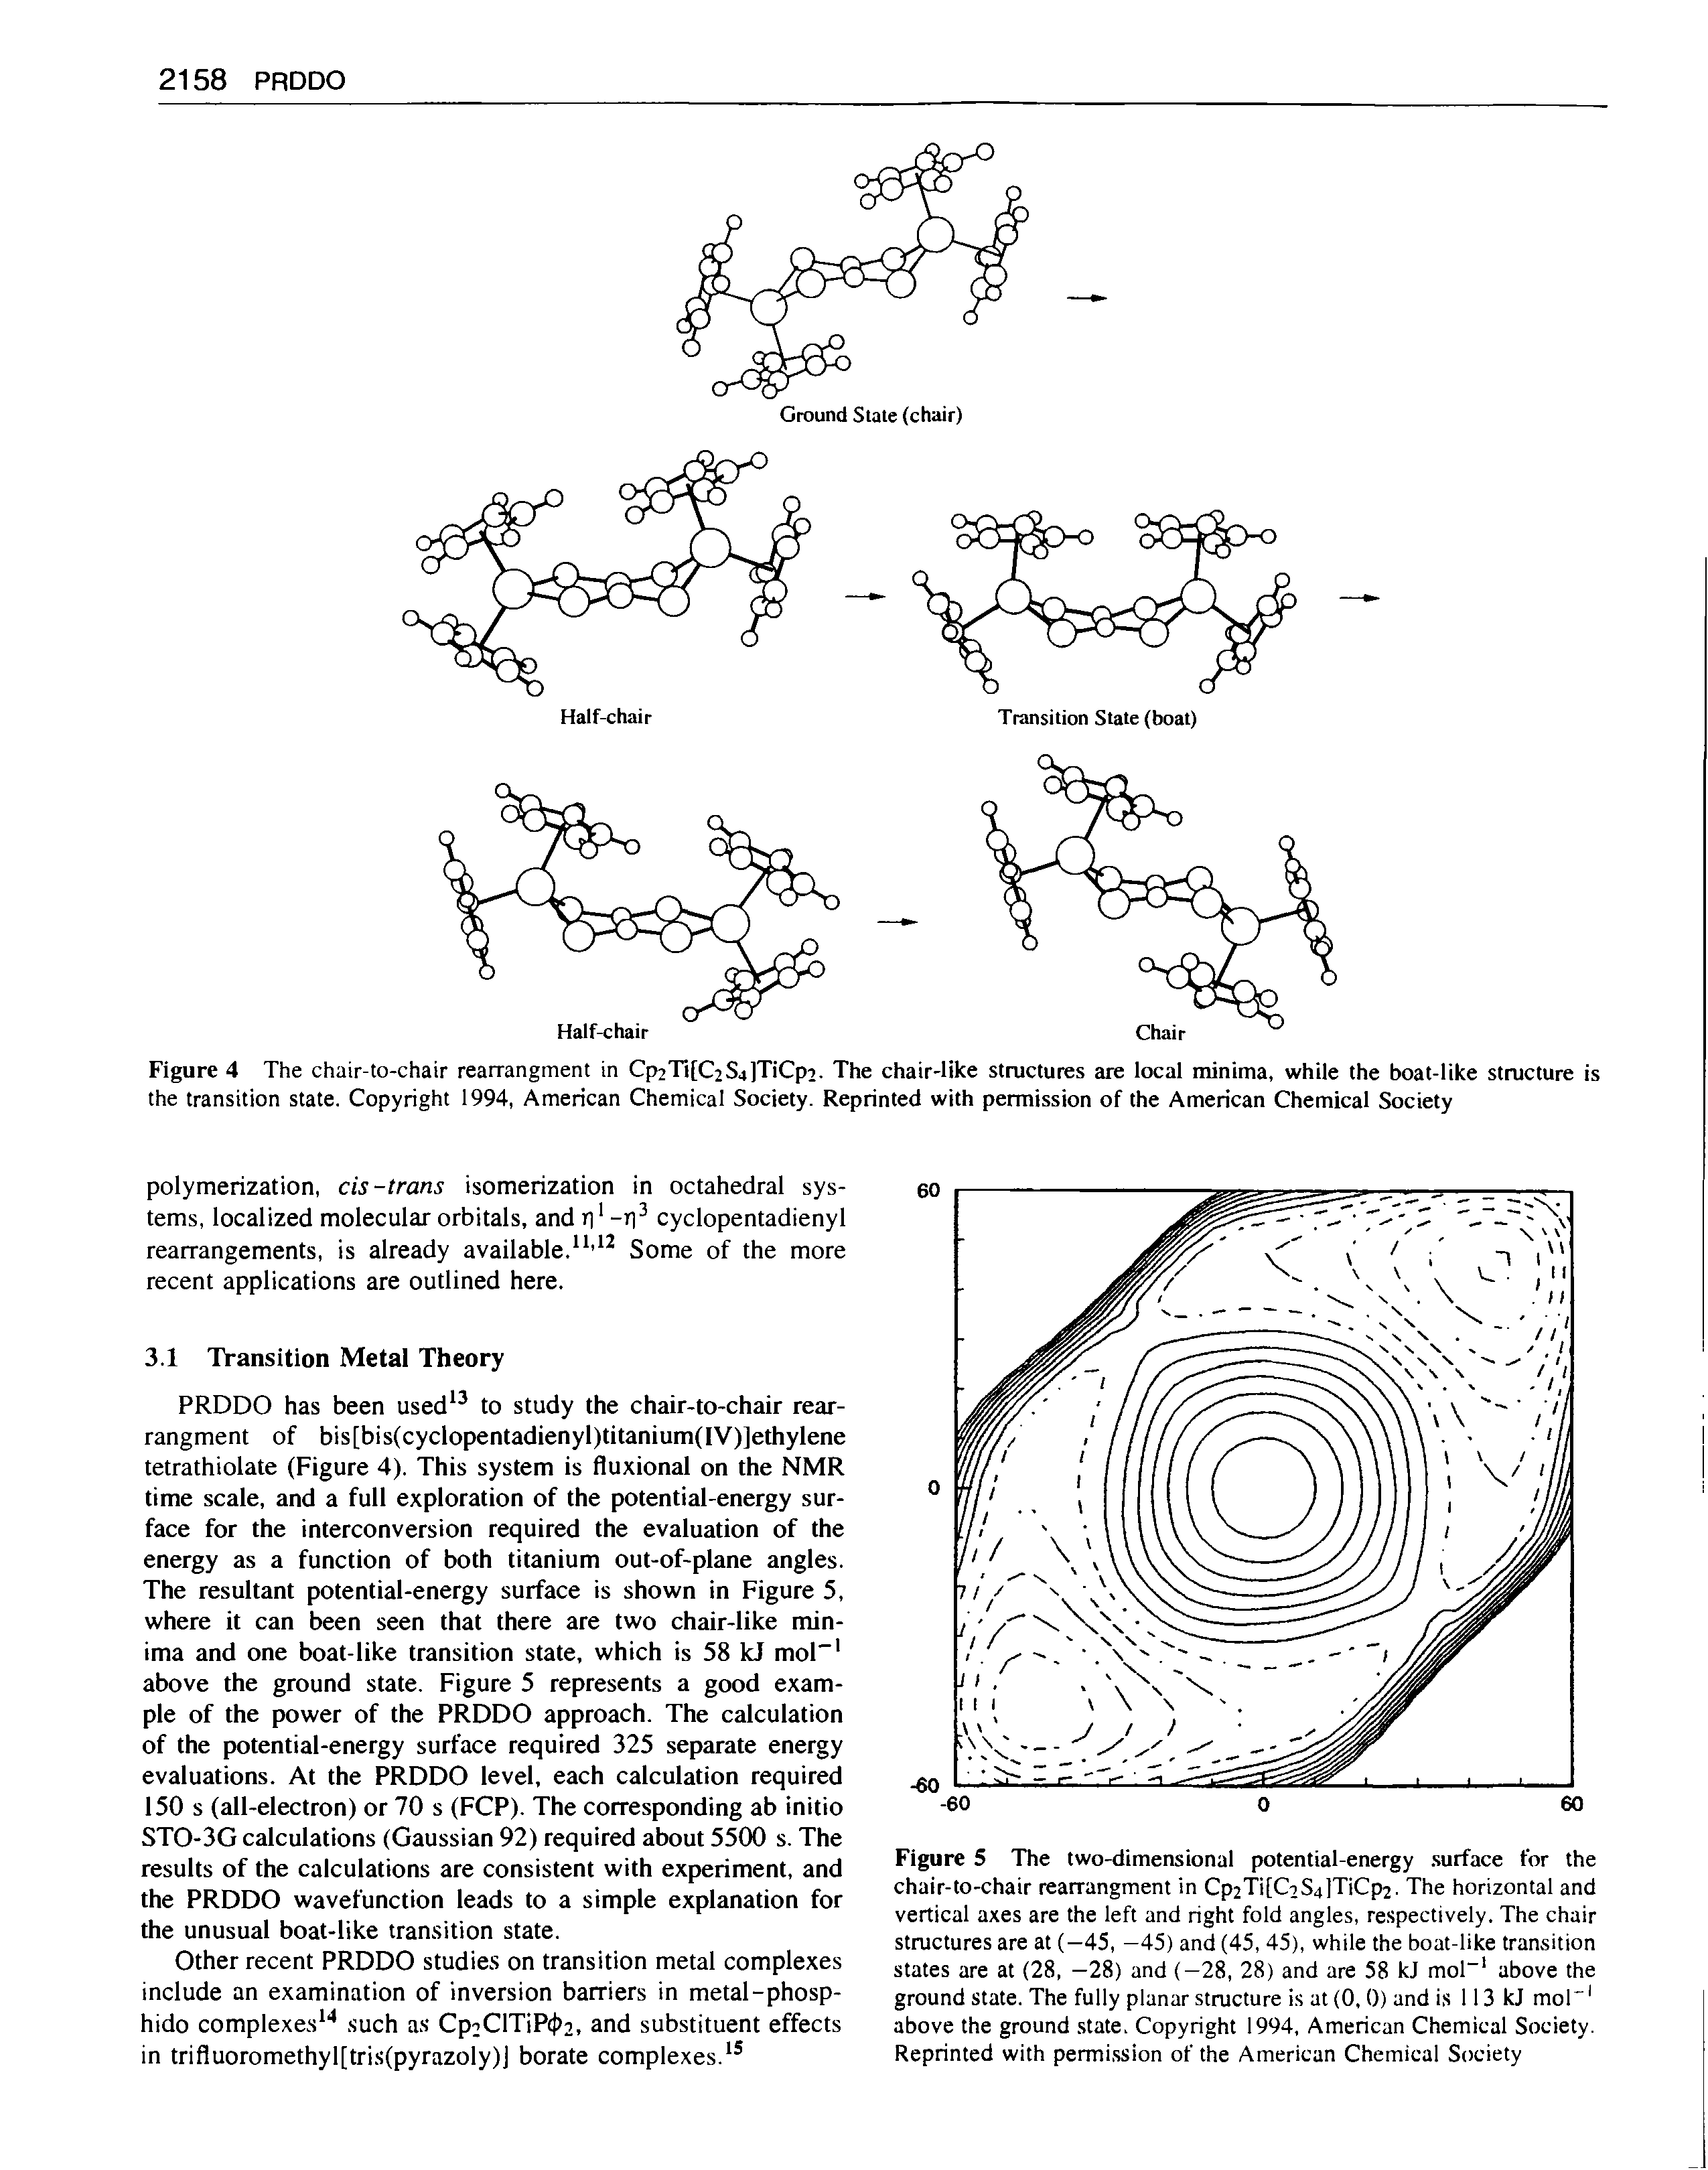 Figure 4 The chair-to-chair rearrangment in Cp2Ti[C2S4lTiCpi. The chair-like structures are local minima, while the boat-like structure is the transition state. Copyright 1994, American Chemical Society. Reprinted with permission of the American Chemical Society...